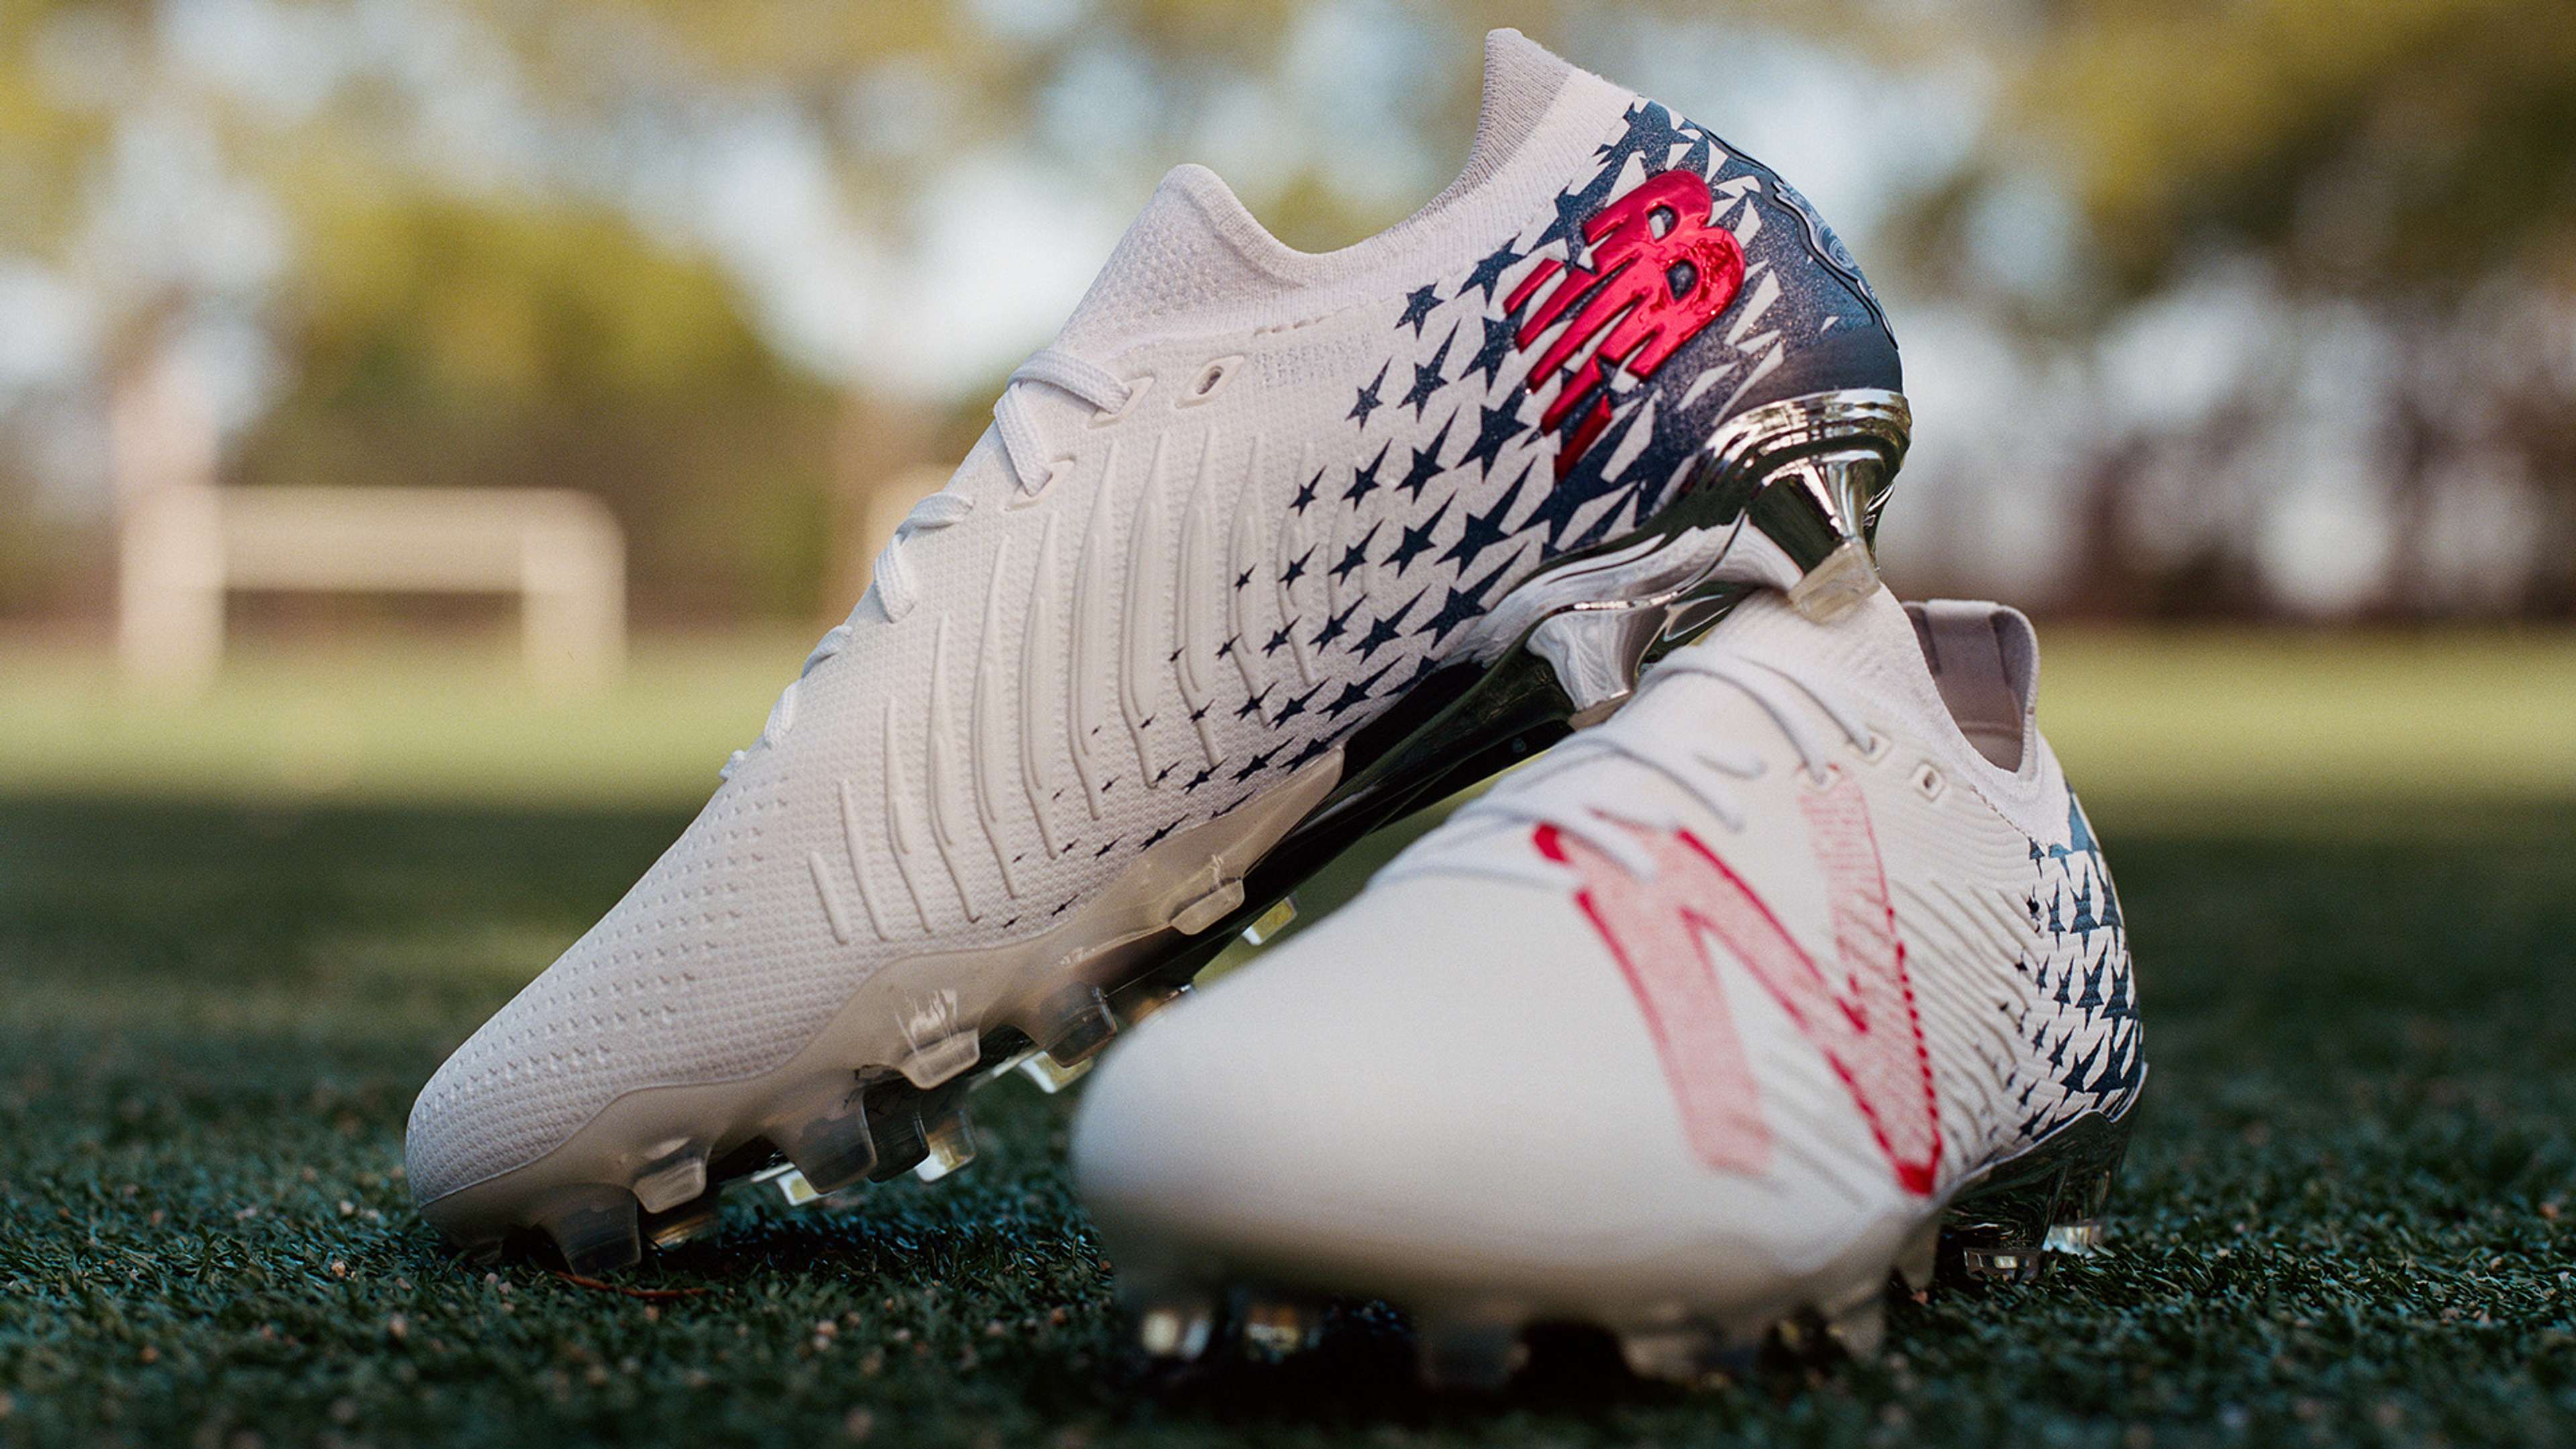 New Balance x Timothy Weah boots